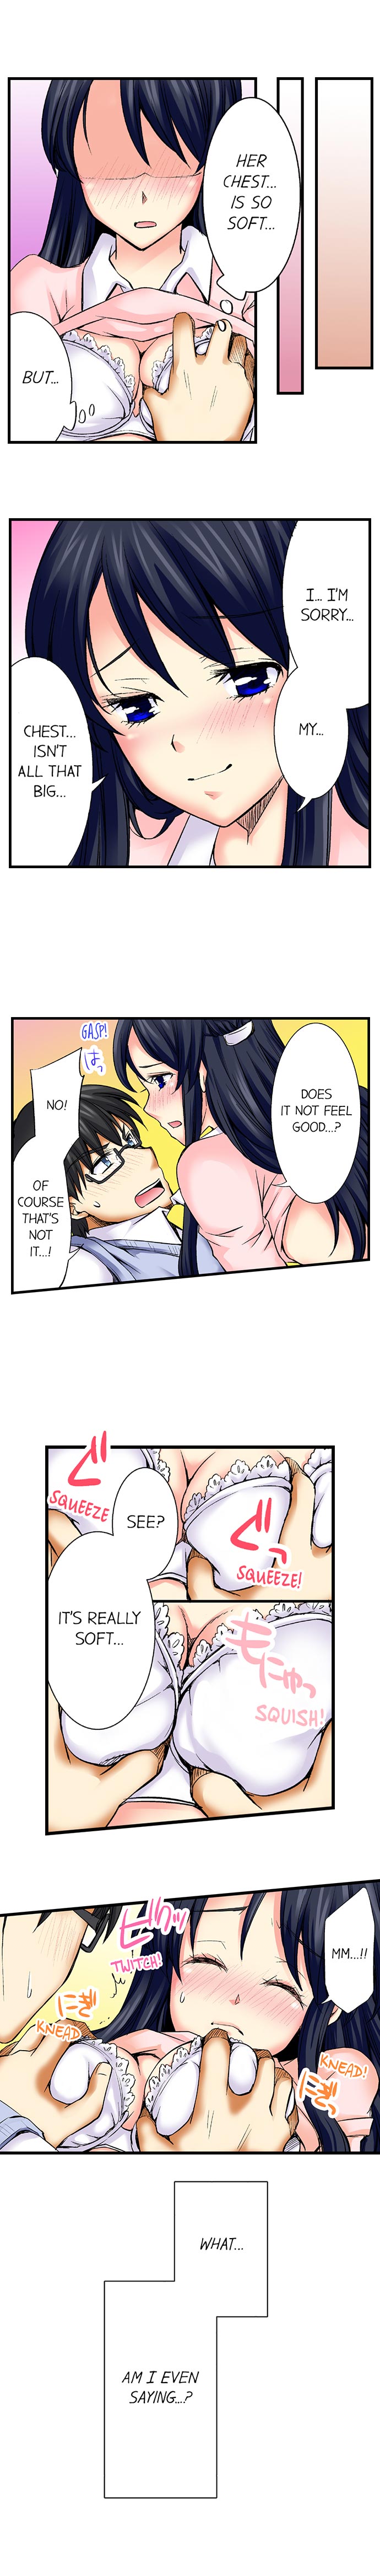 Why Can't i Have Sex With My Teacher? - Chapter 14 Page 2